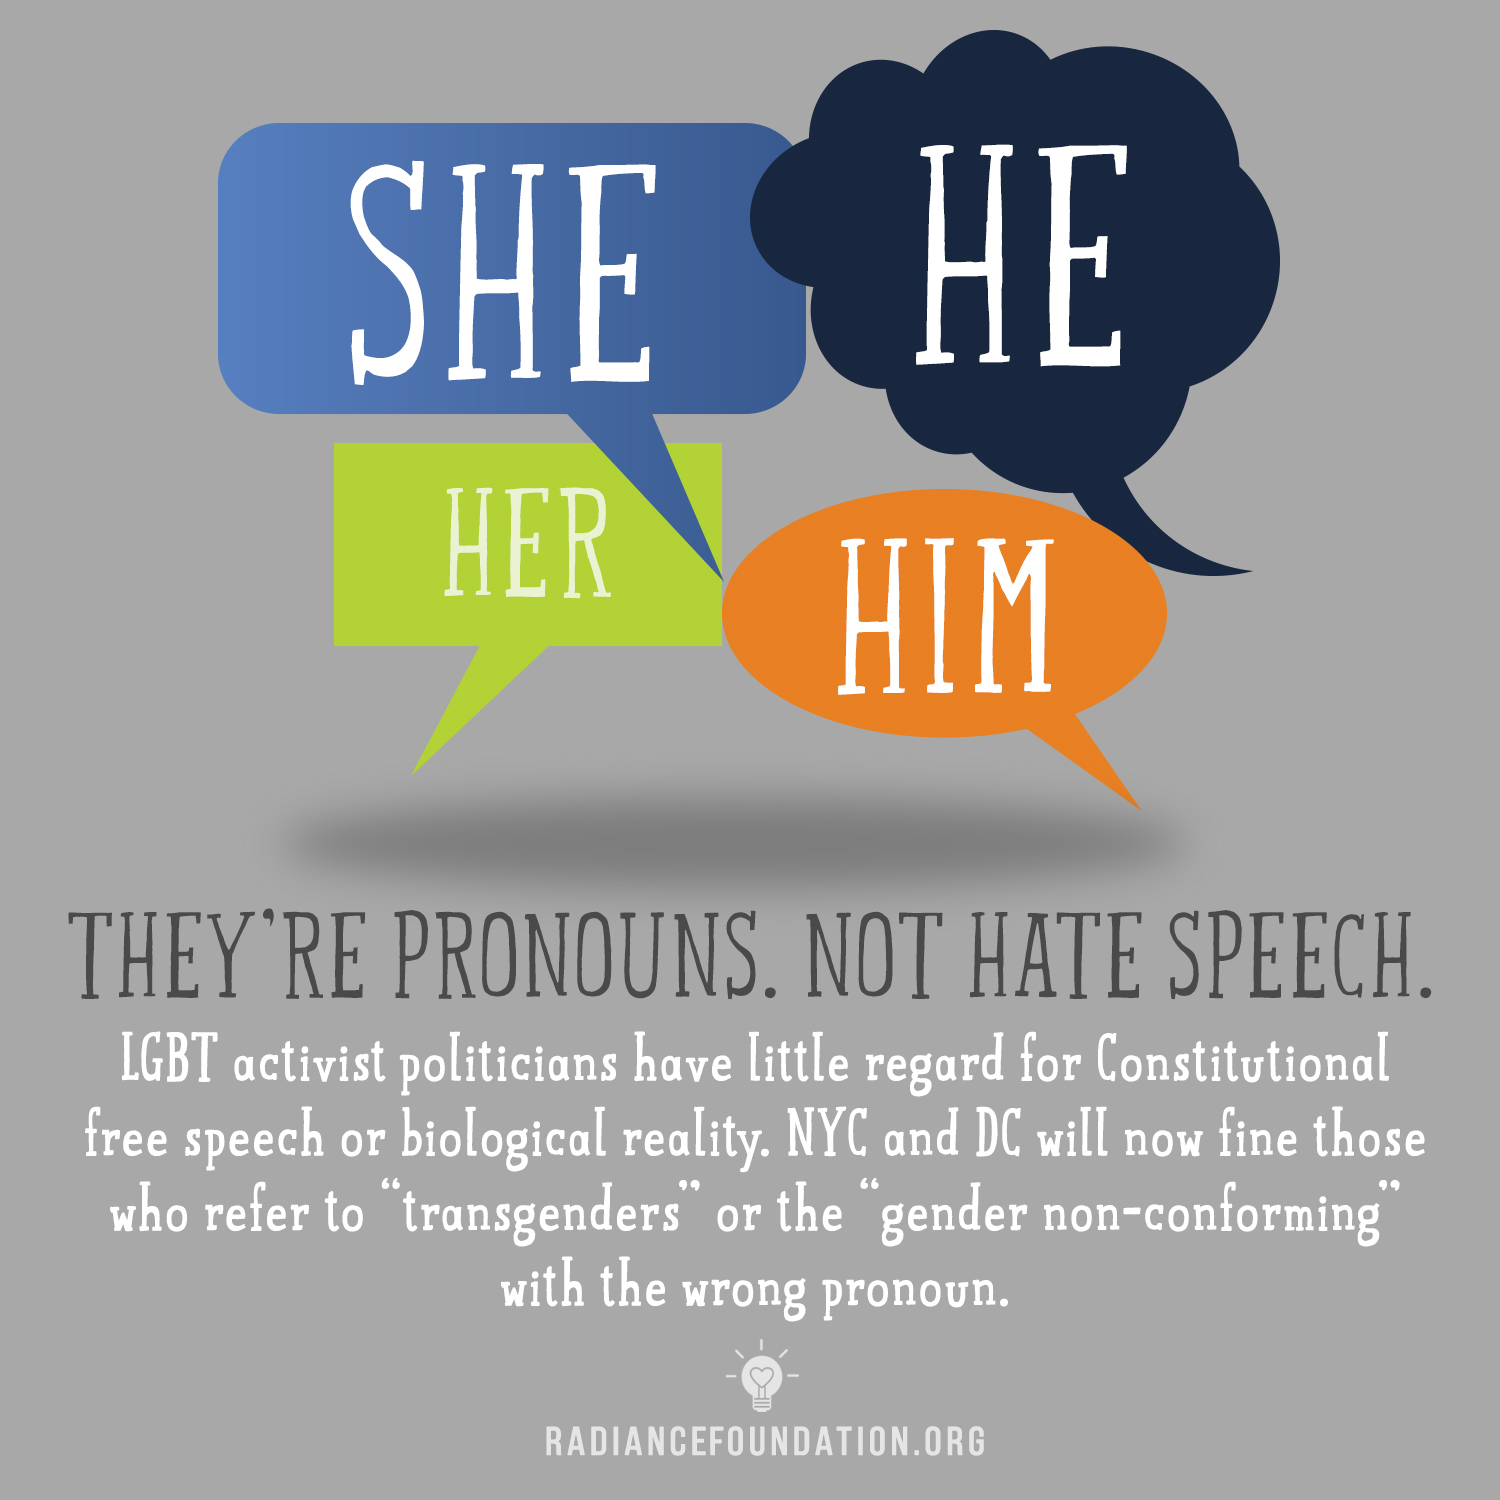 "Pronouns-Not Hate Speech" by The Radiance Foundation